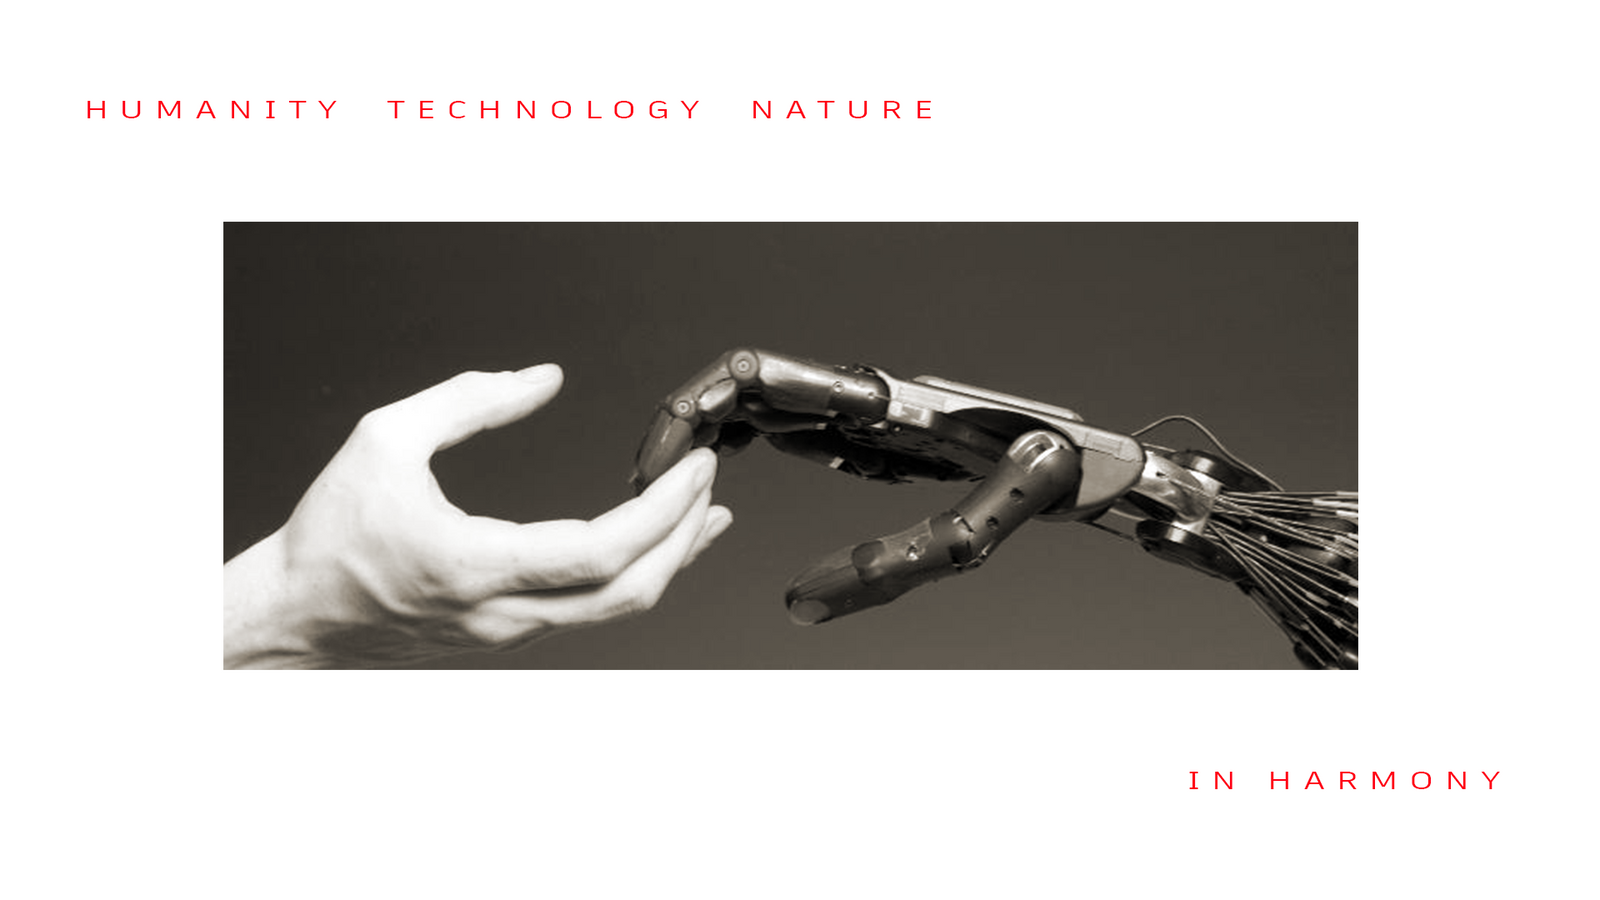 Humanity Technology Nature in Harmony